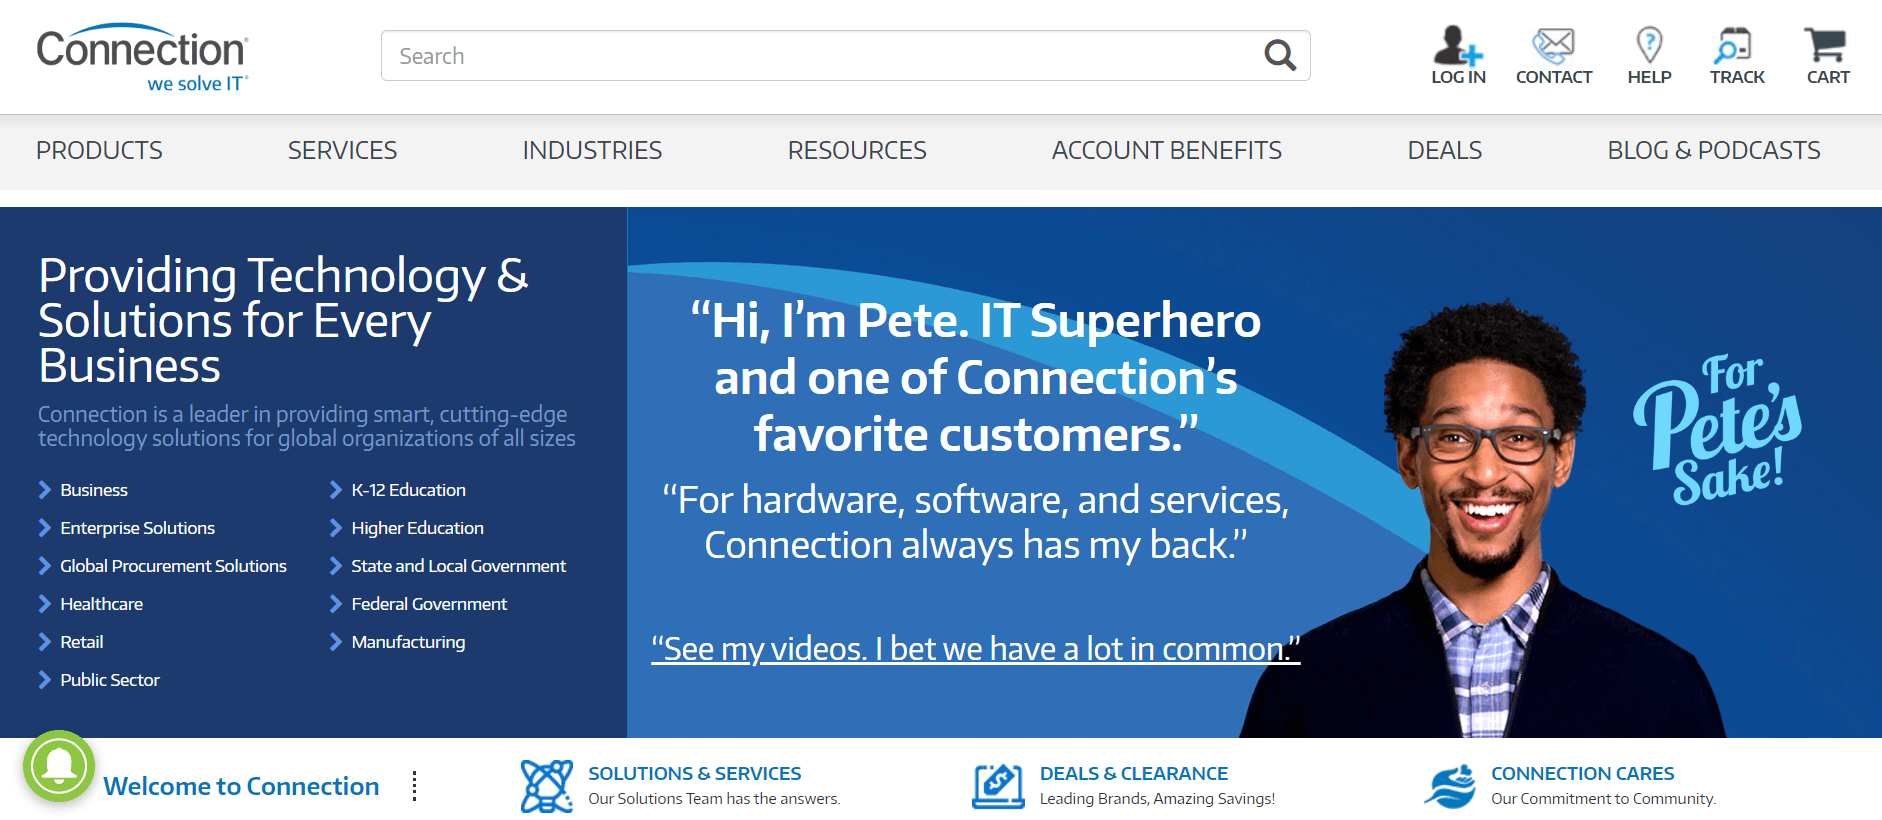 PC Connection homepage: Providing Technology & Solutions for Every Business